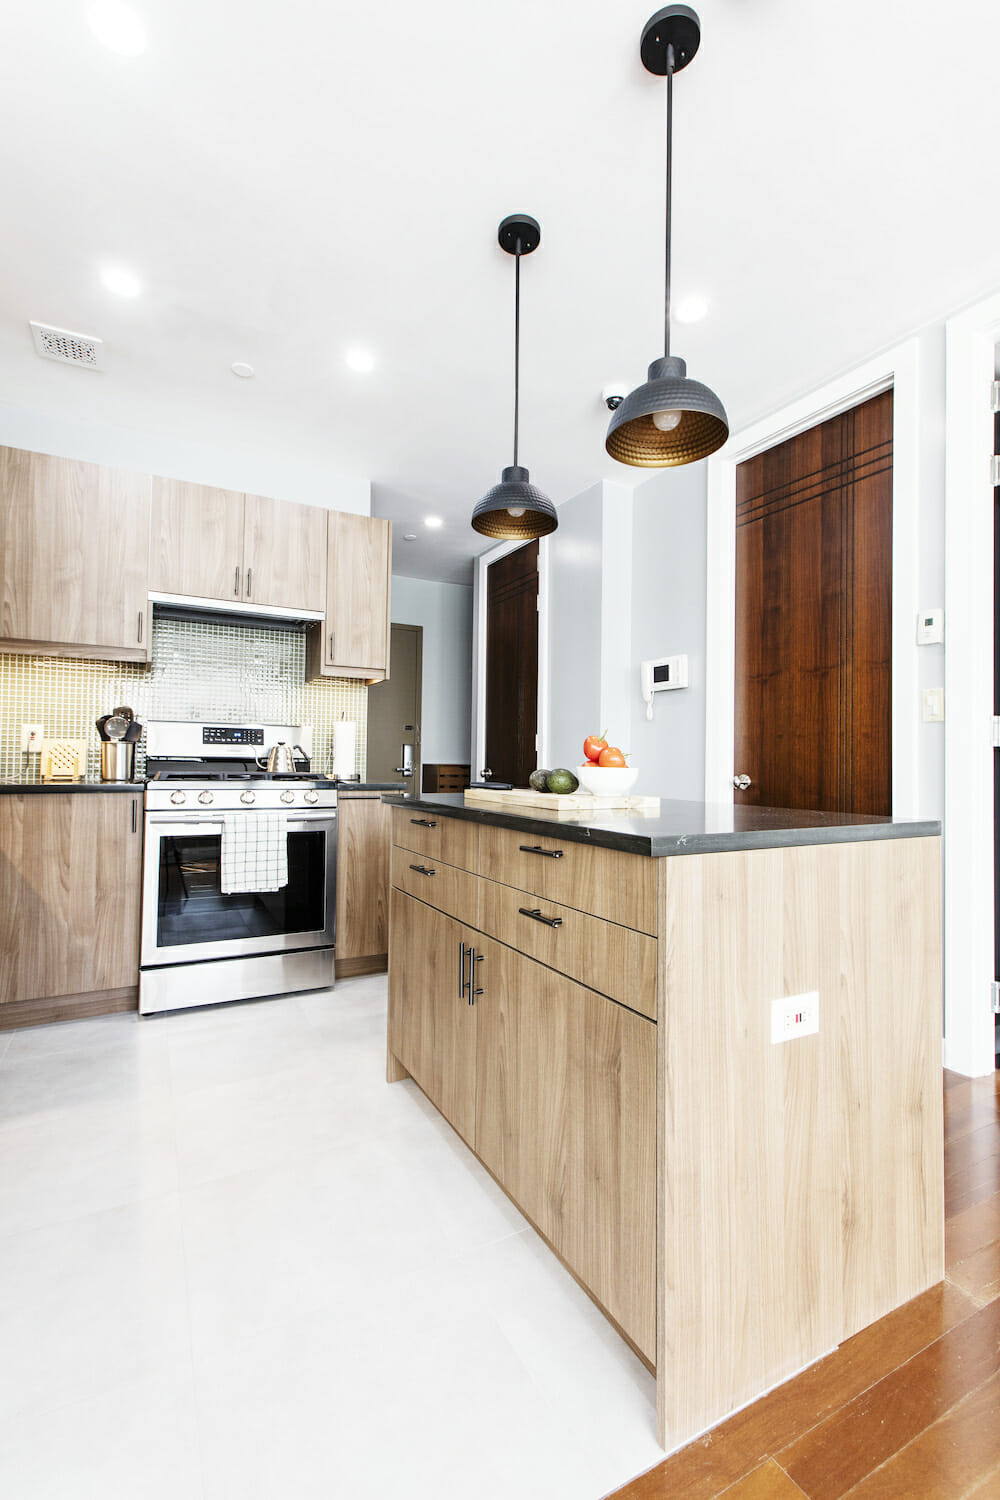 kitchen with natural wood cabinets and black granite countertop and island with pendant lights and white tiles on floor and recessed lighting after renovation